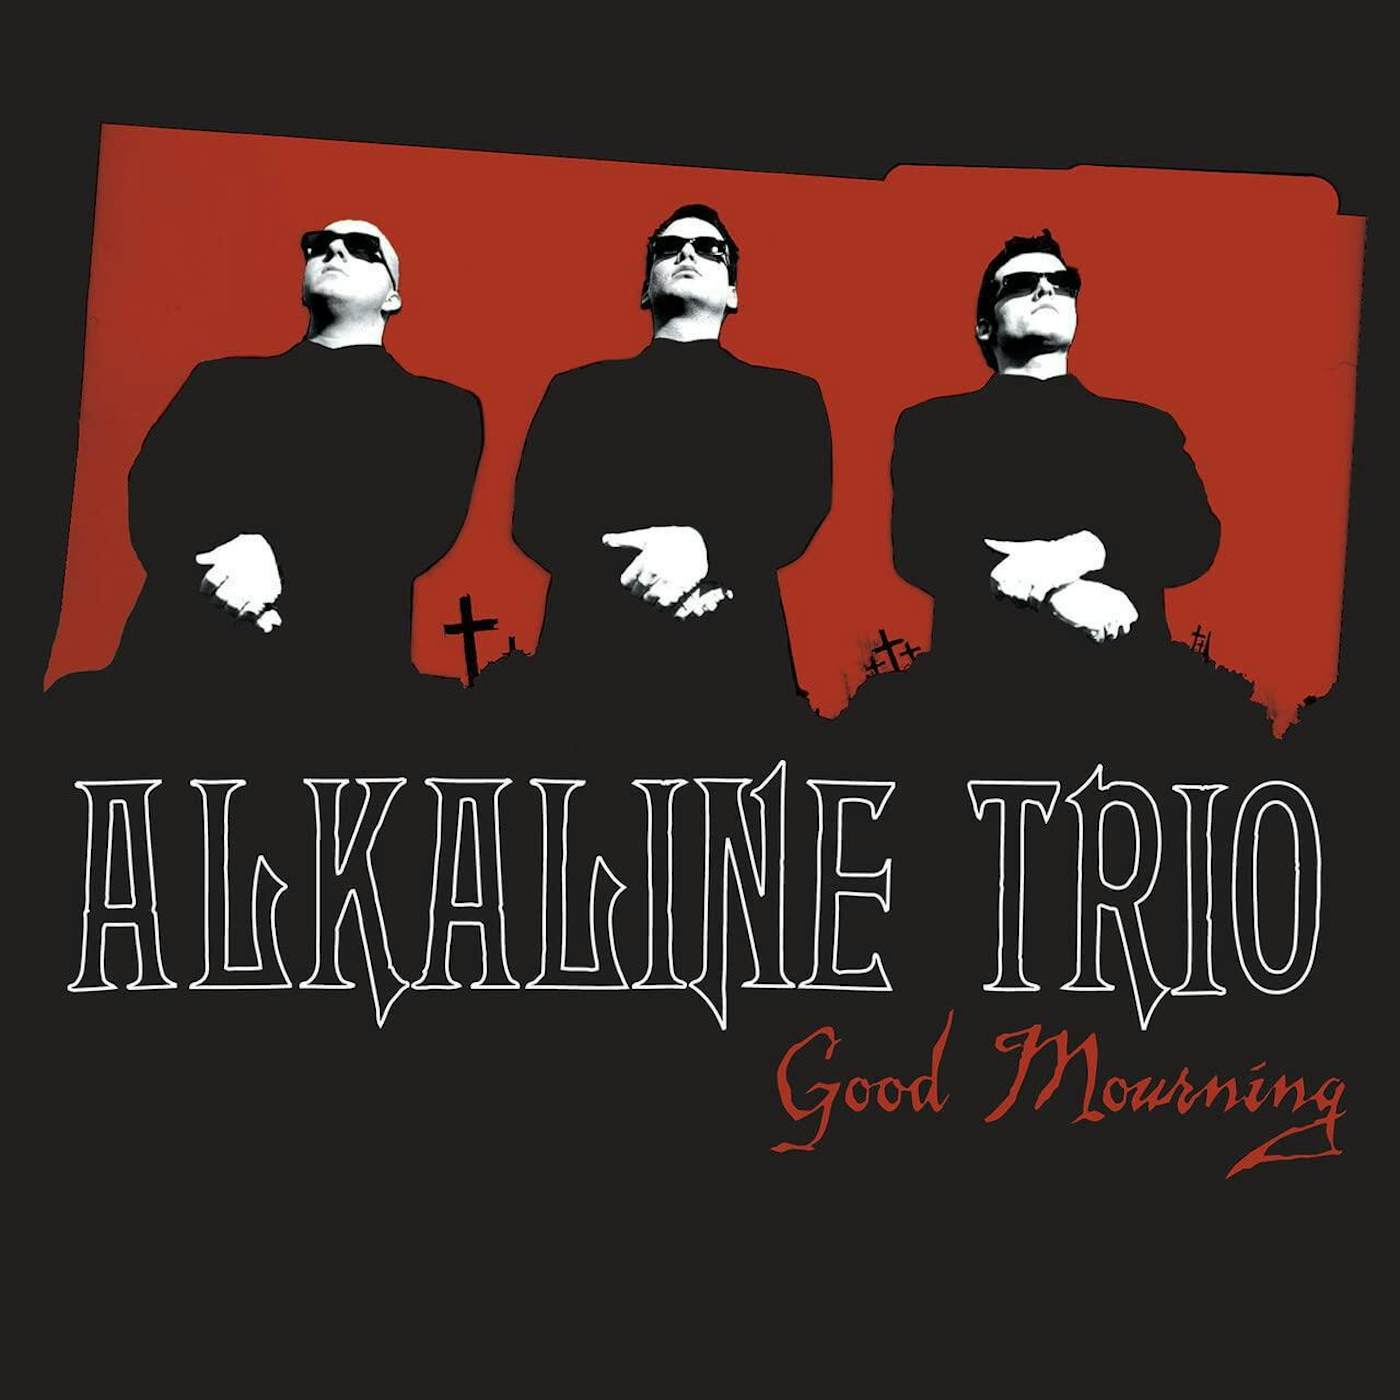 Alkaline Trio Good Mourning (Deluxe/Limited Edition) Vinyl Record